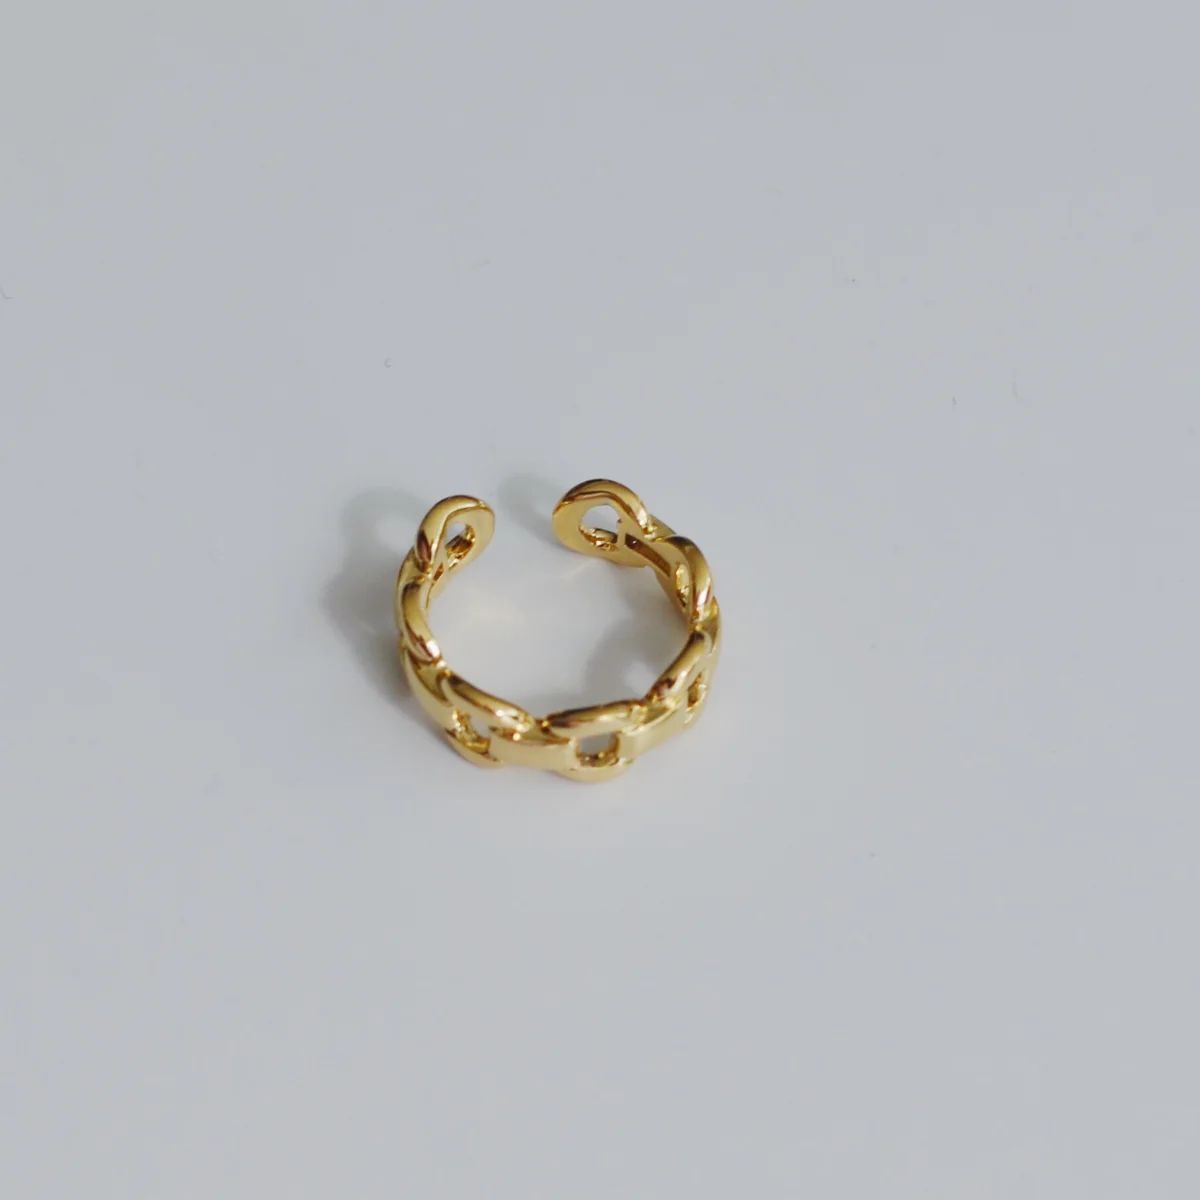 GOLD CHAIN BAND RING | Shapes Studio